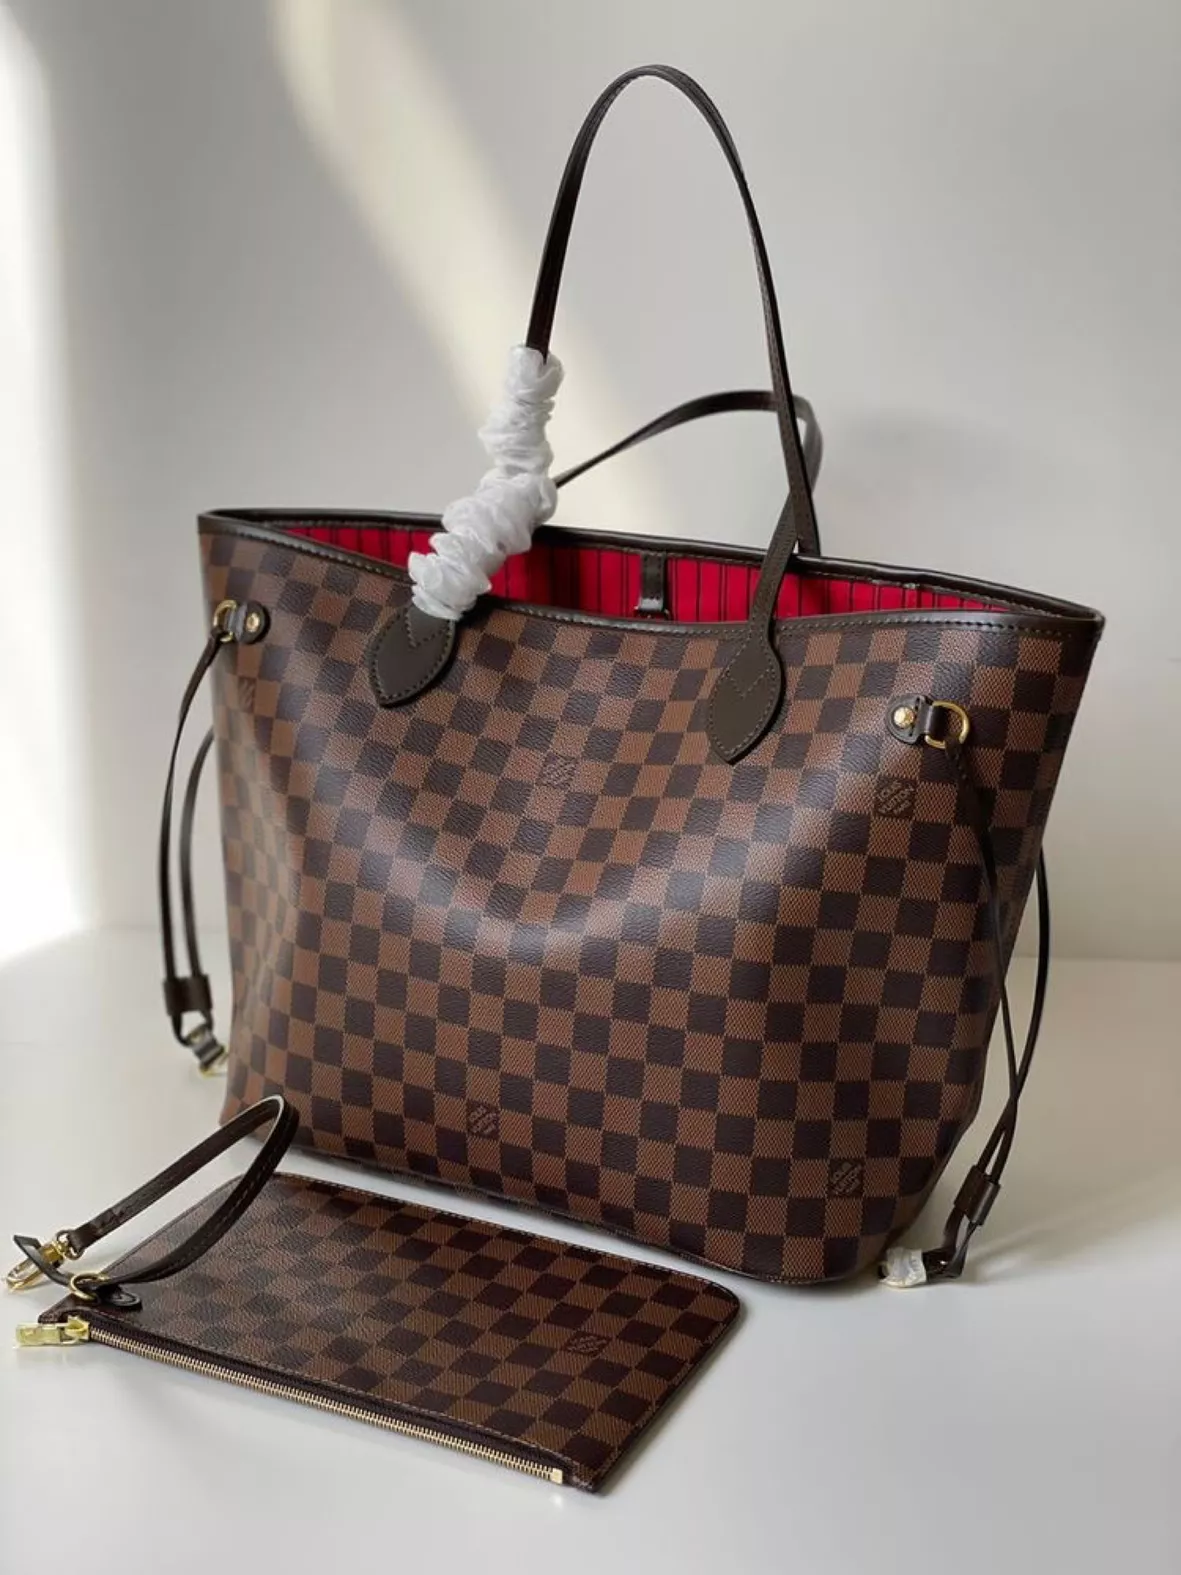 Great Quality DHgate Louis Vuitton Style Neverfull MM Tote Bag